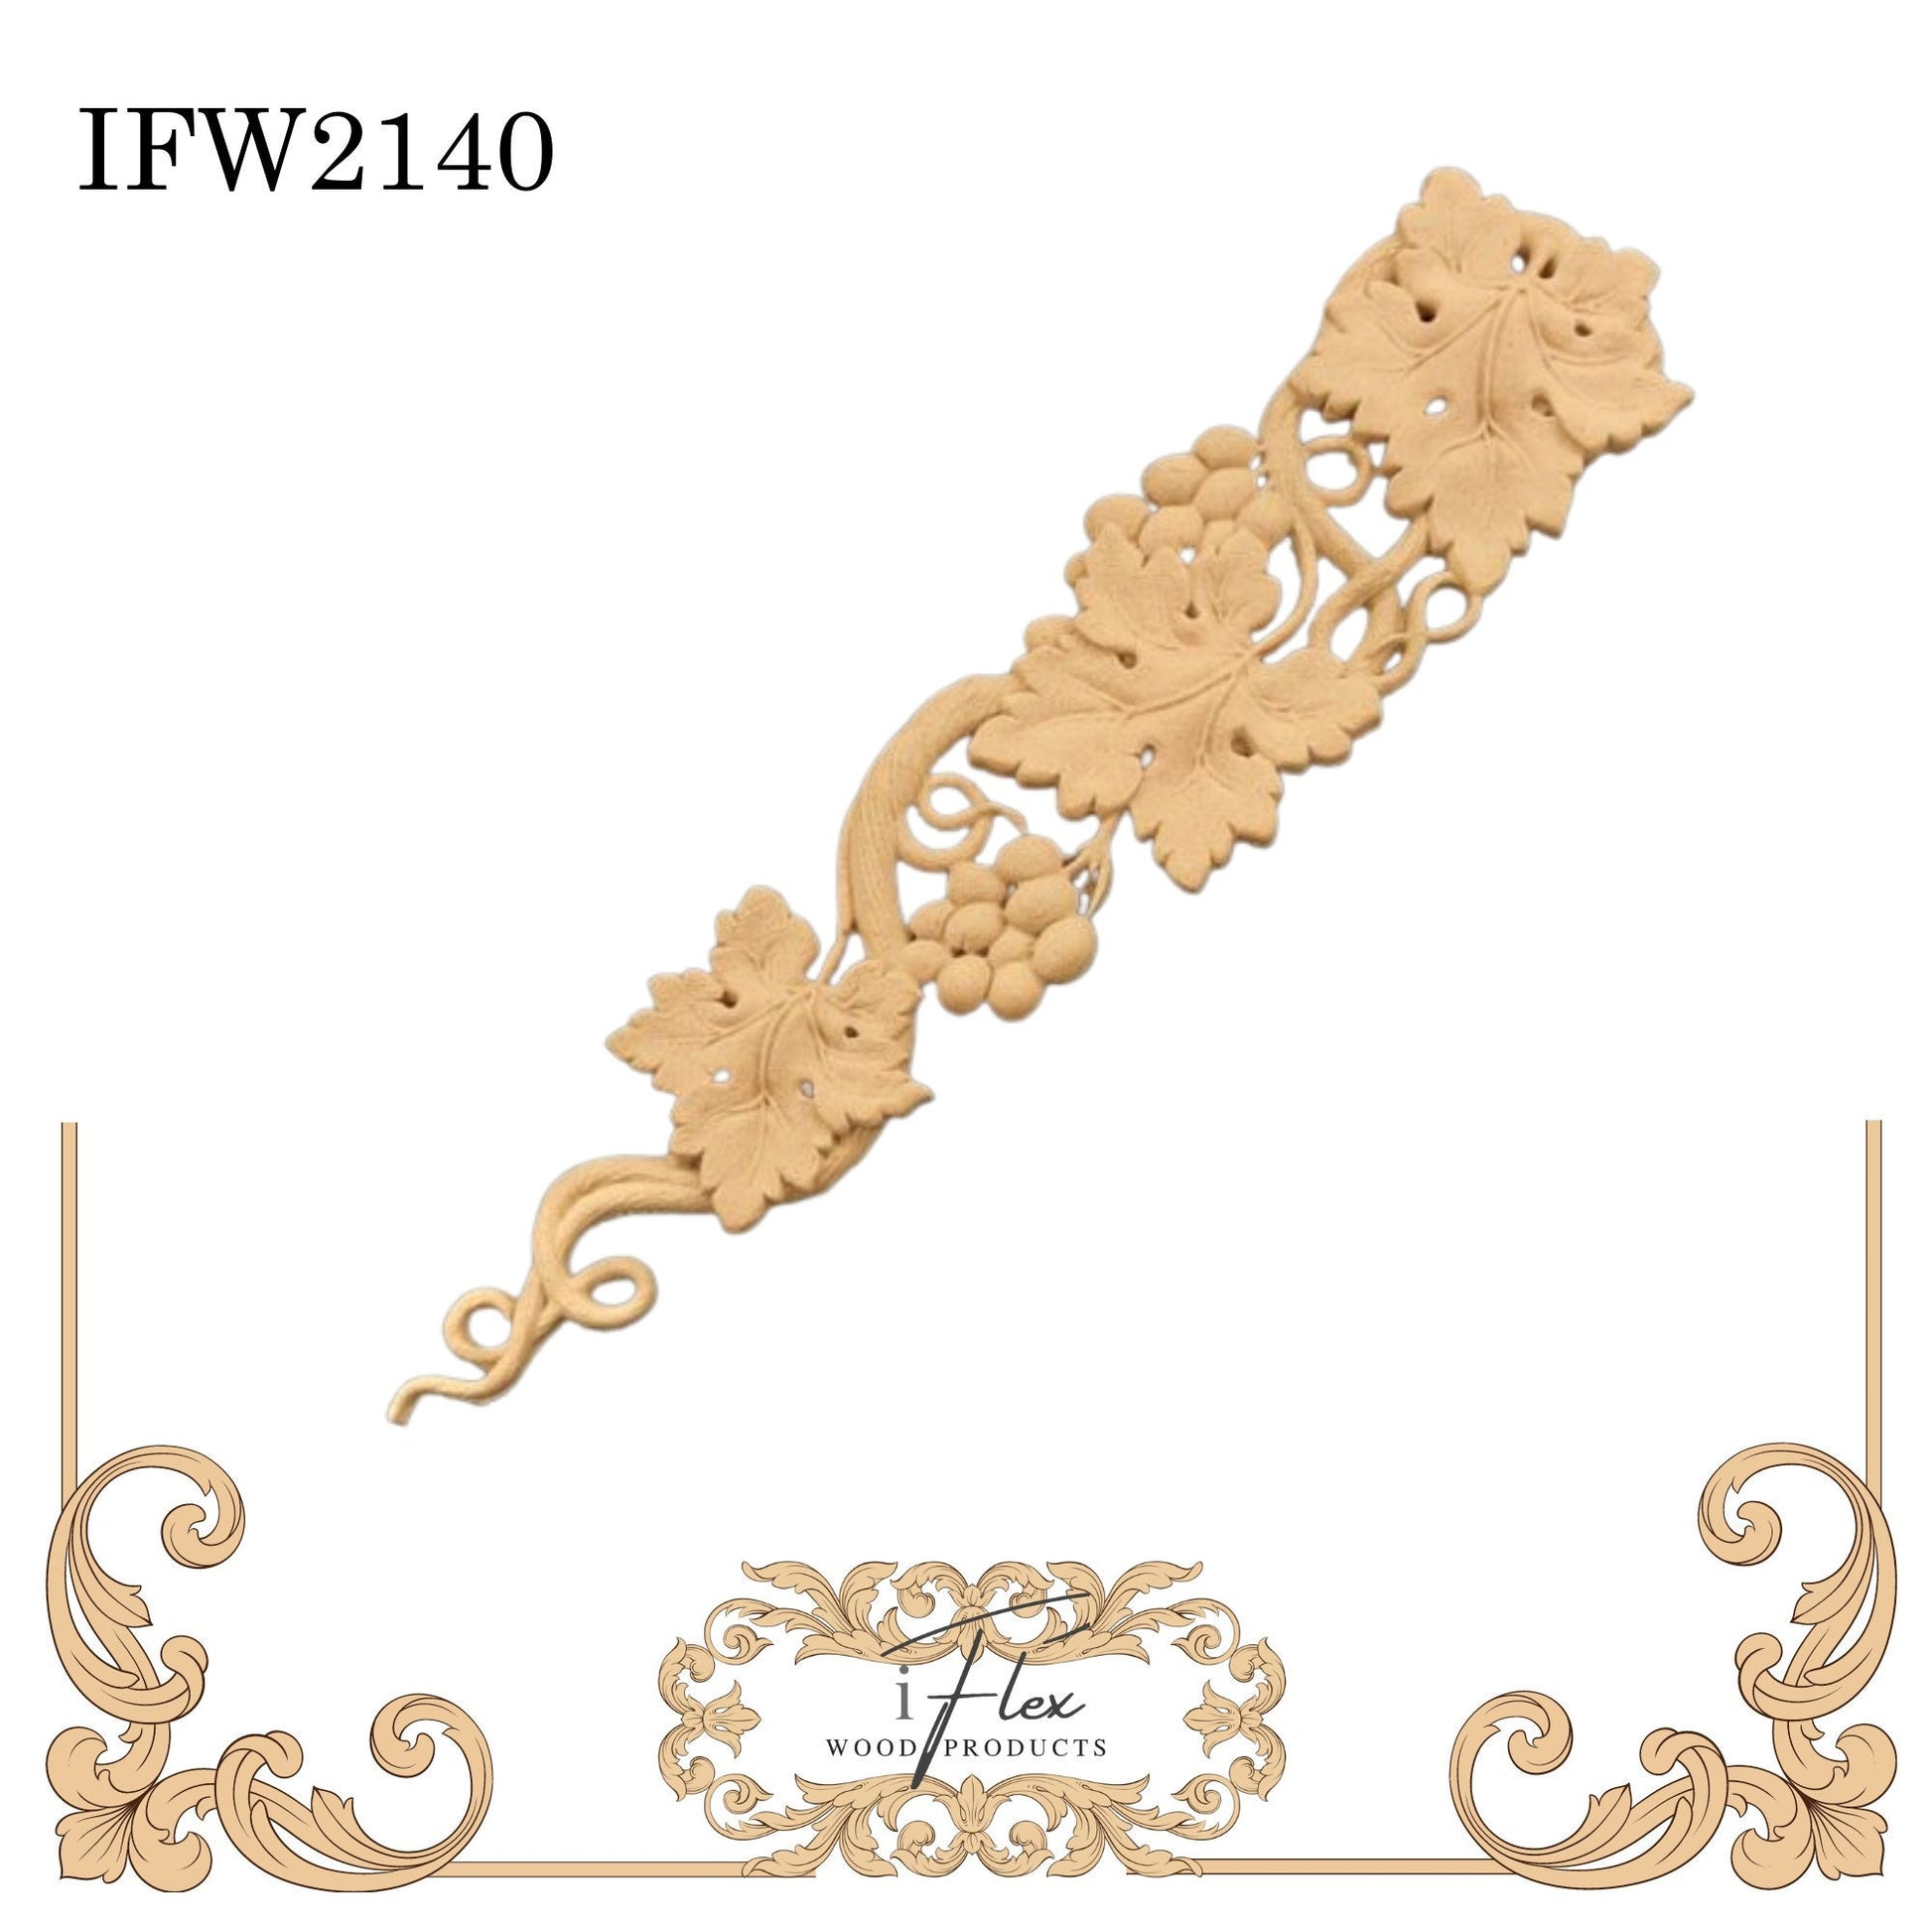 IFW 2140 iFlex Wood Products, bendable mouldings, flexible, wooden appliques, drop, flower